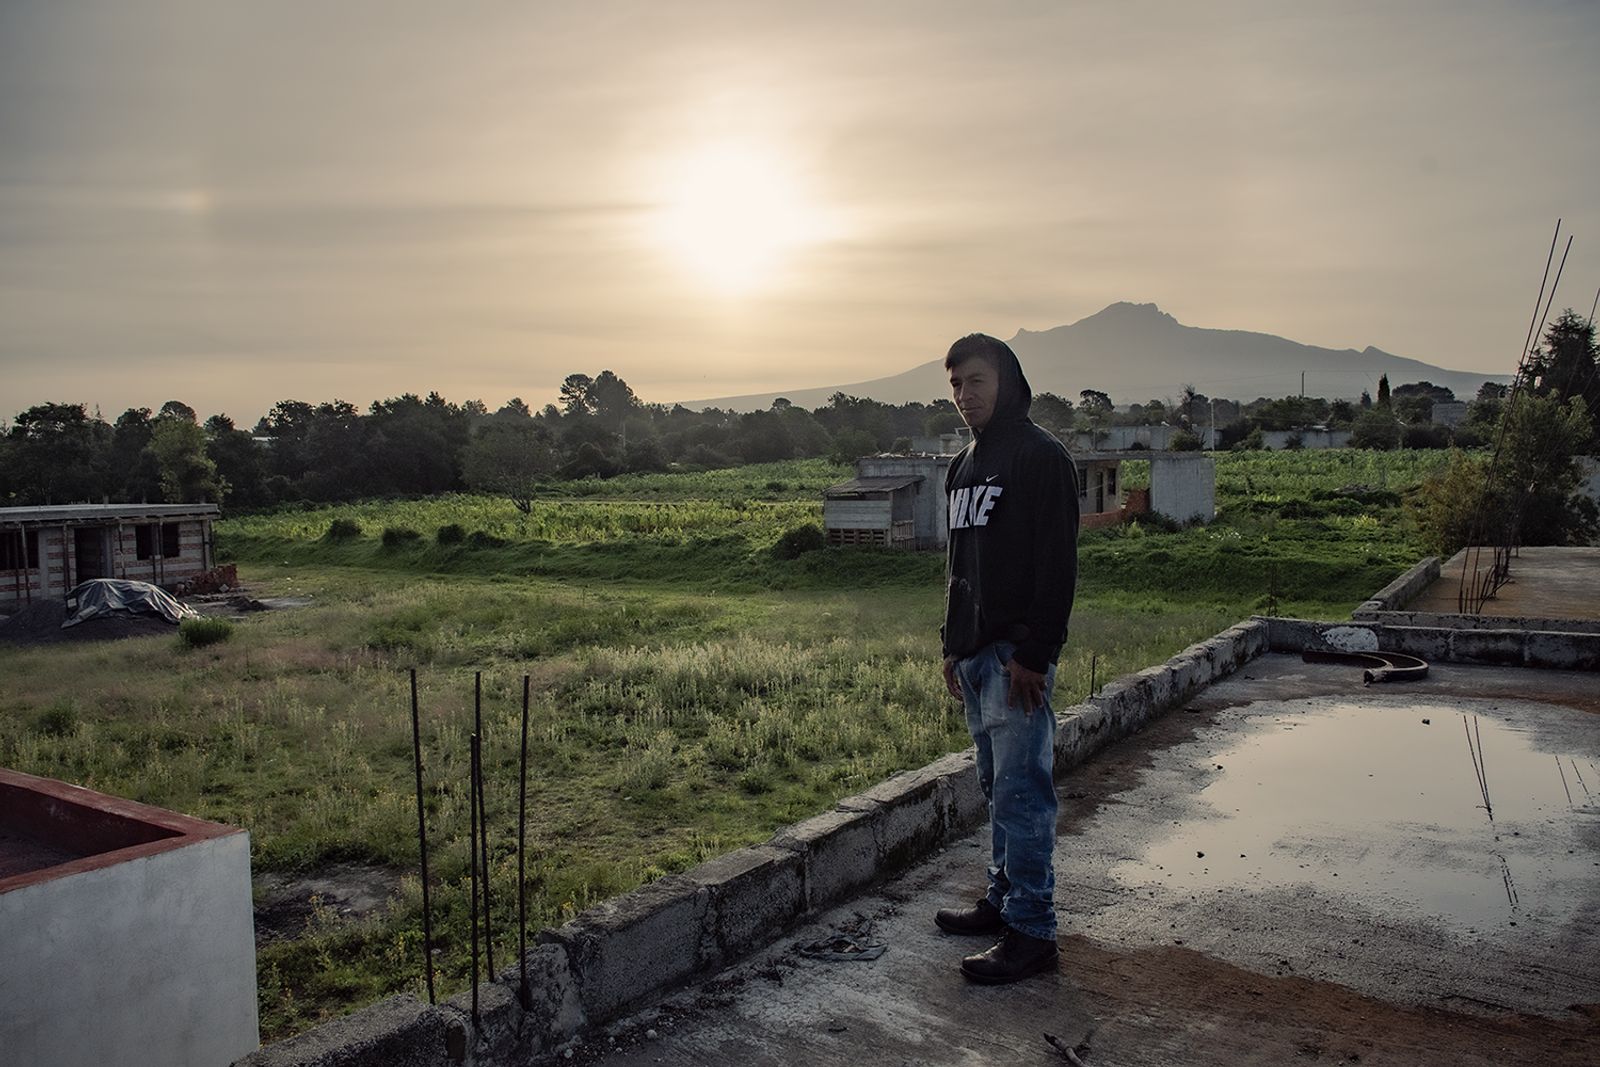 © Evelyn Corte Espinosa - Chucho who is one of the participants, watching the sunrise from his roof